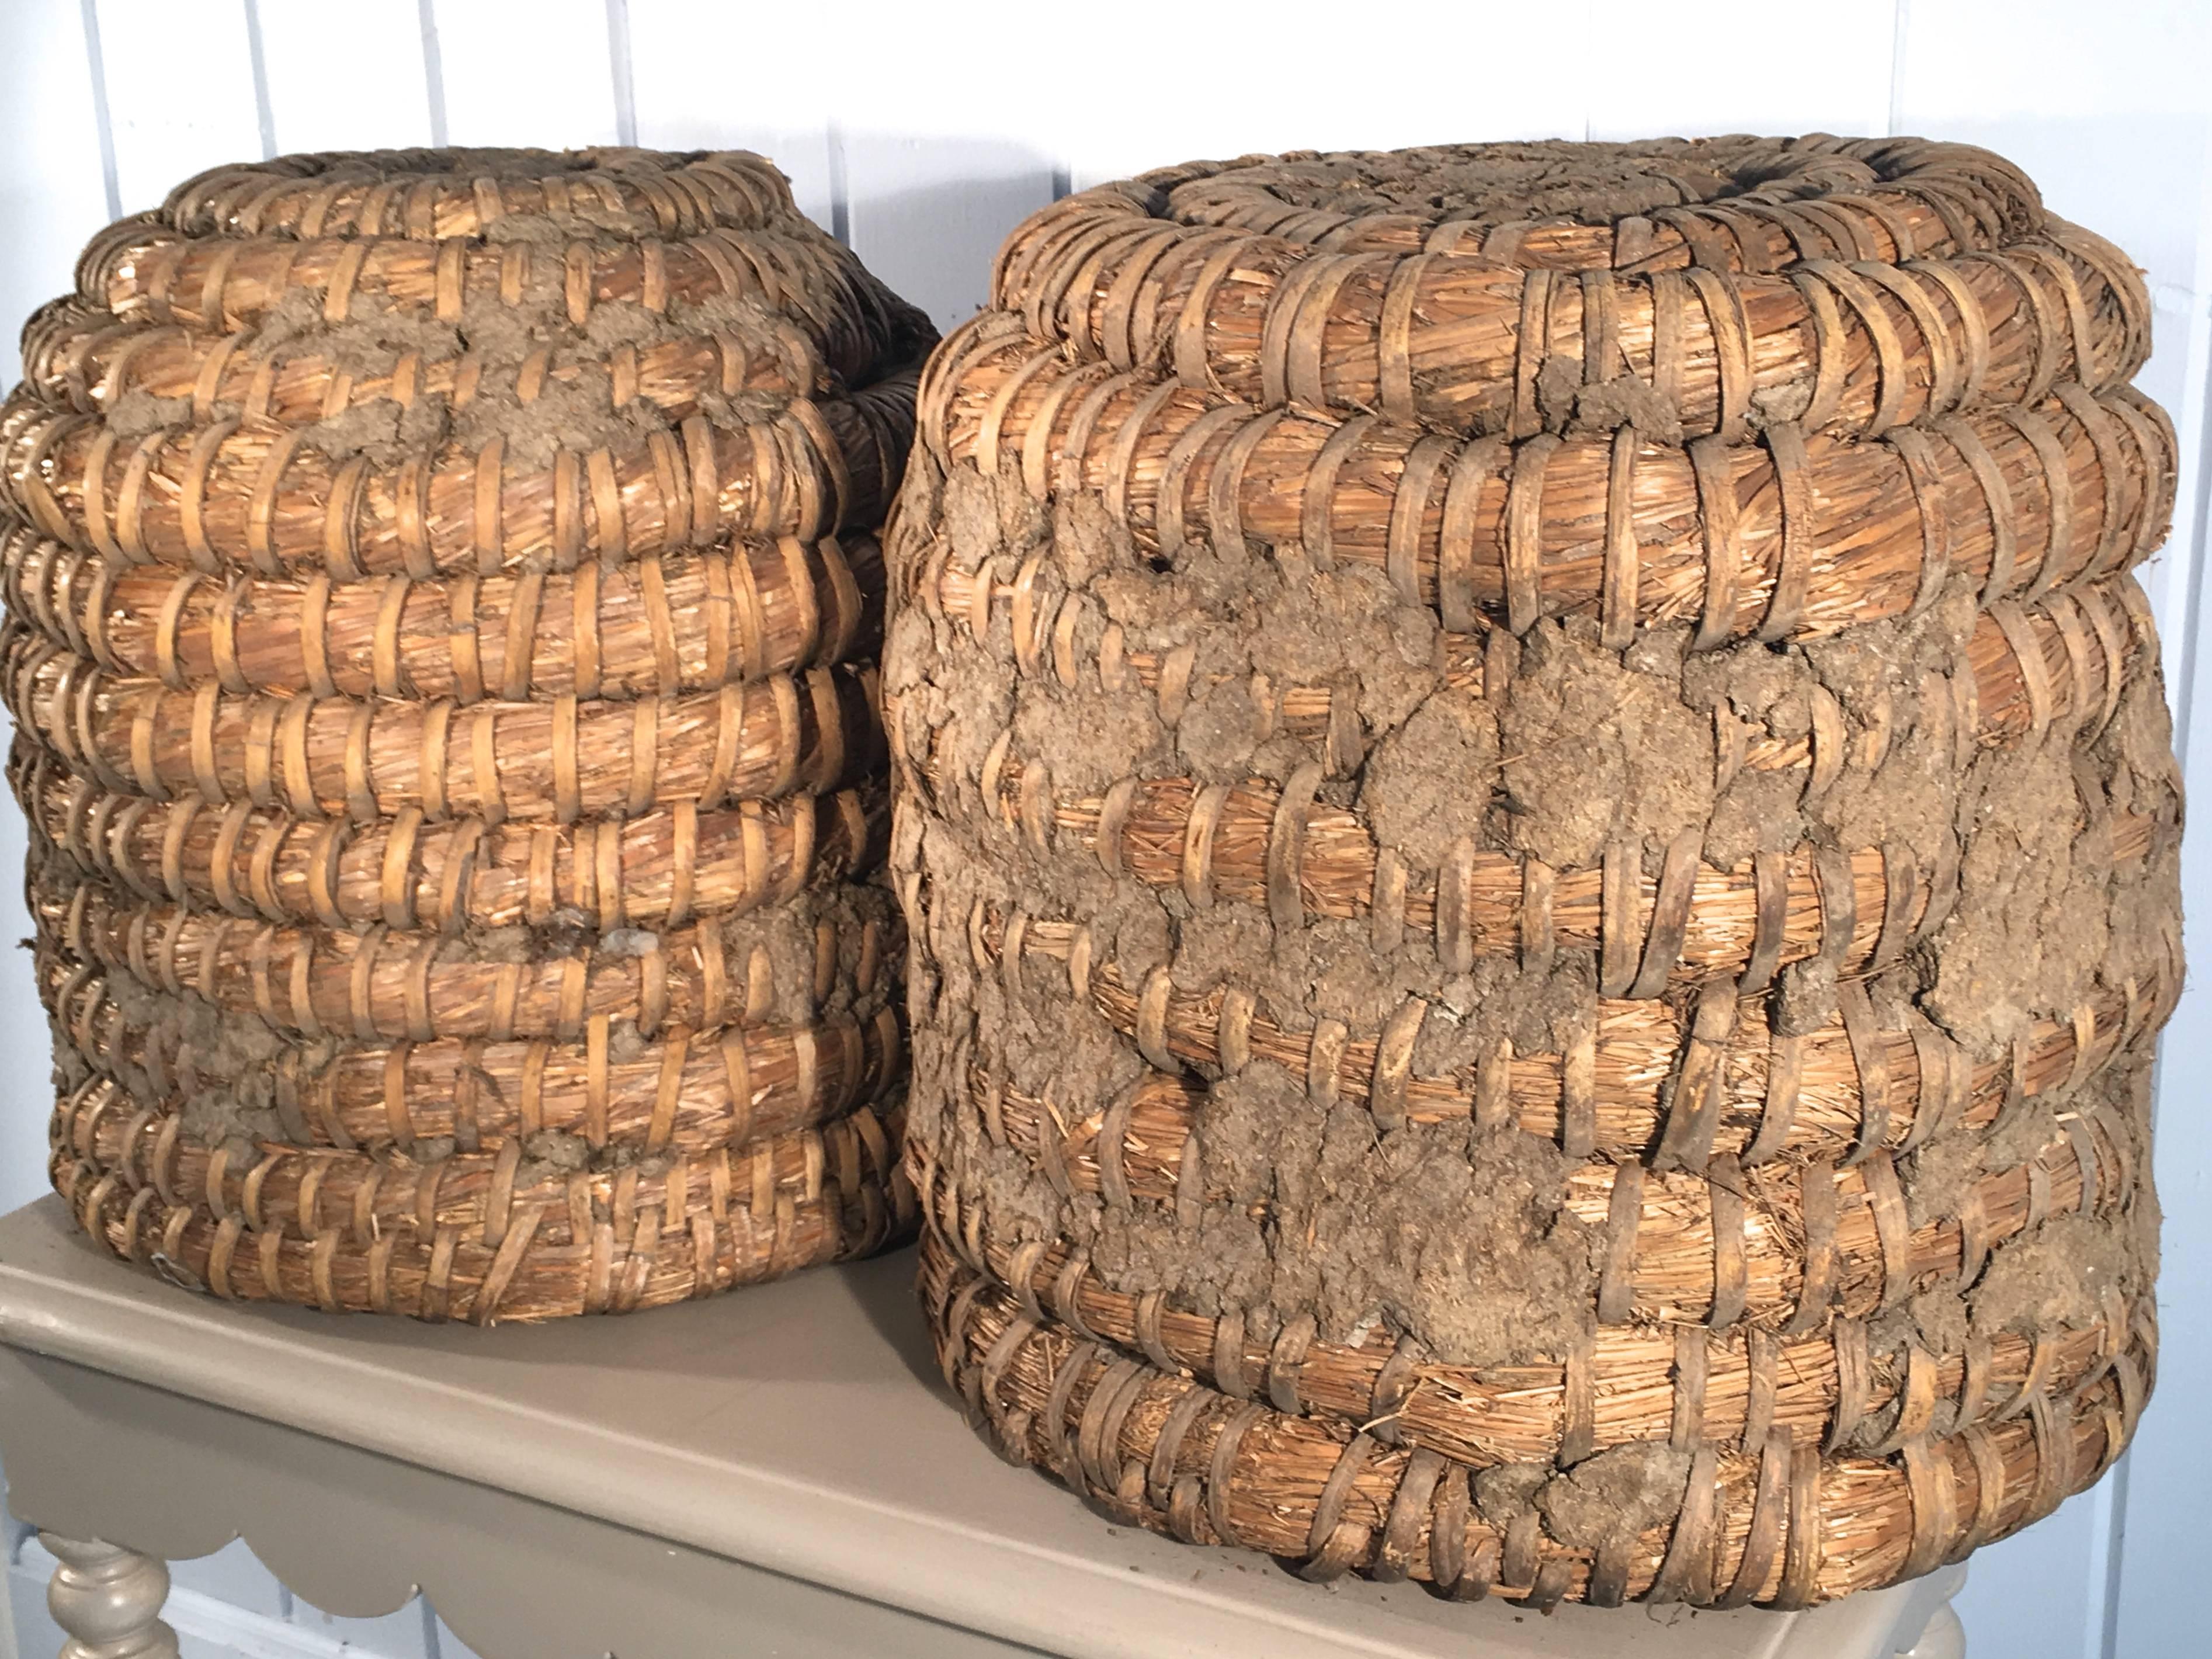 This lovely pair of bee skeps is in all original condition with matted dirt still in the crevices. Fresh from an apiary near Hamburg, they would make stunning accent pieces, wastepaper baskets, or they can be converted into hanging pendant lights.